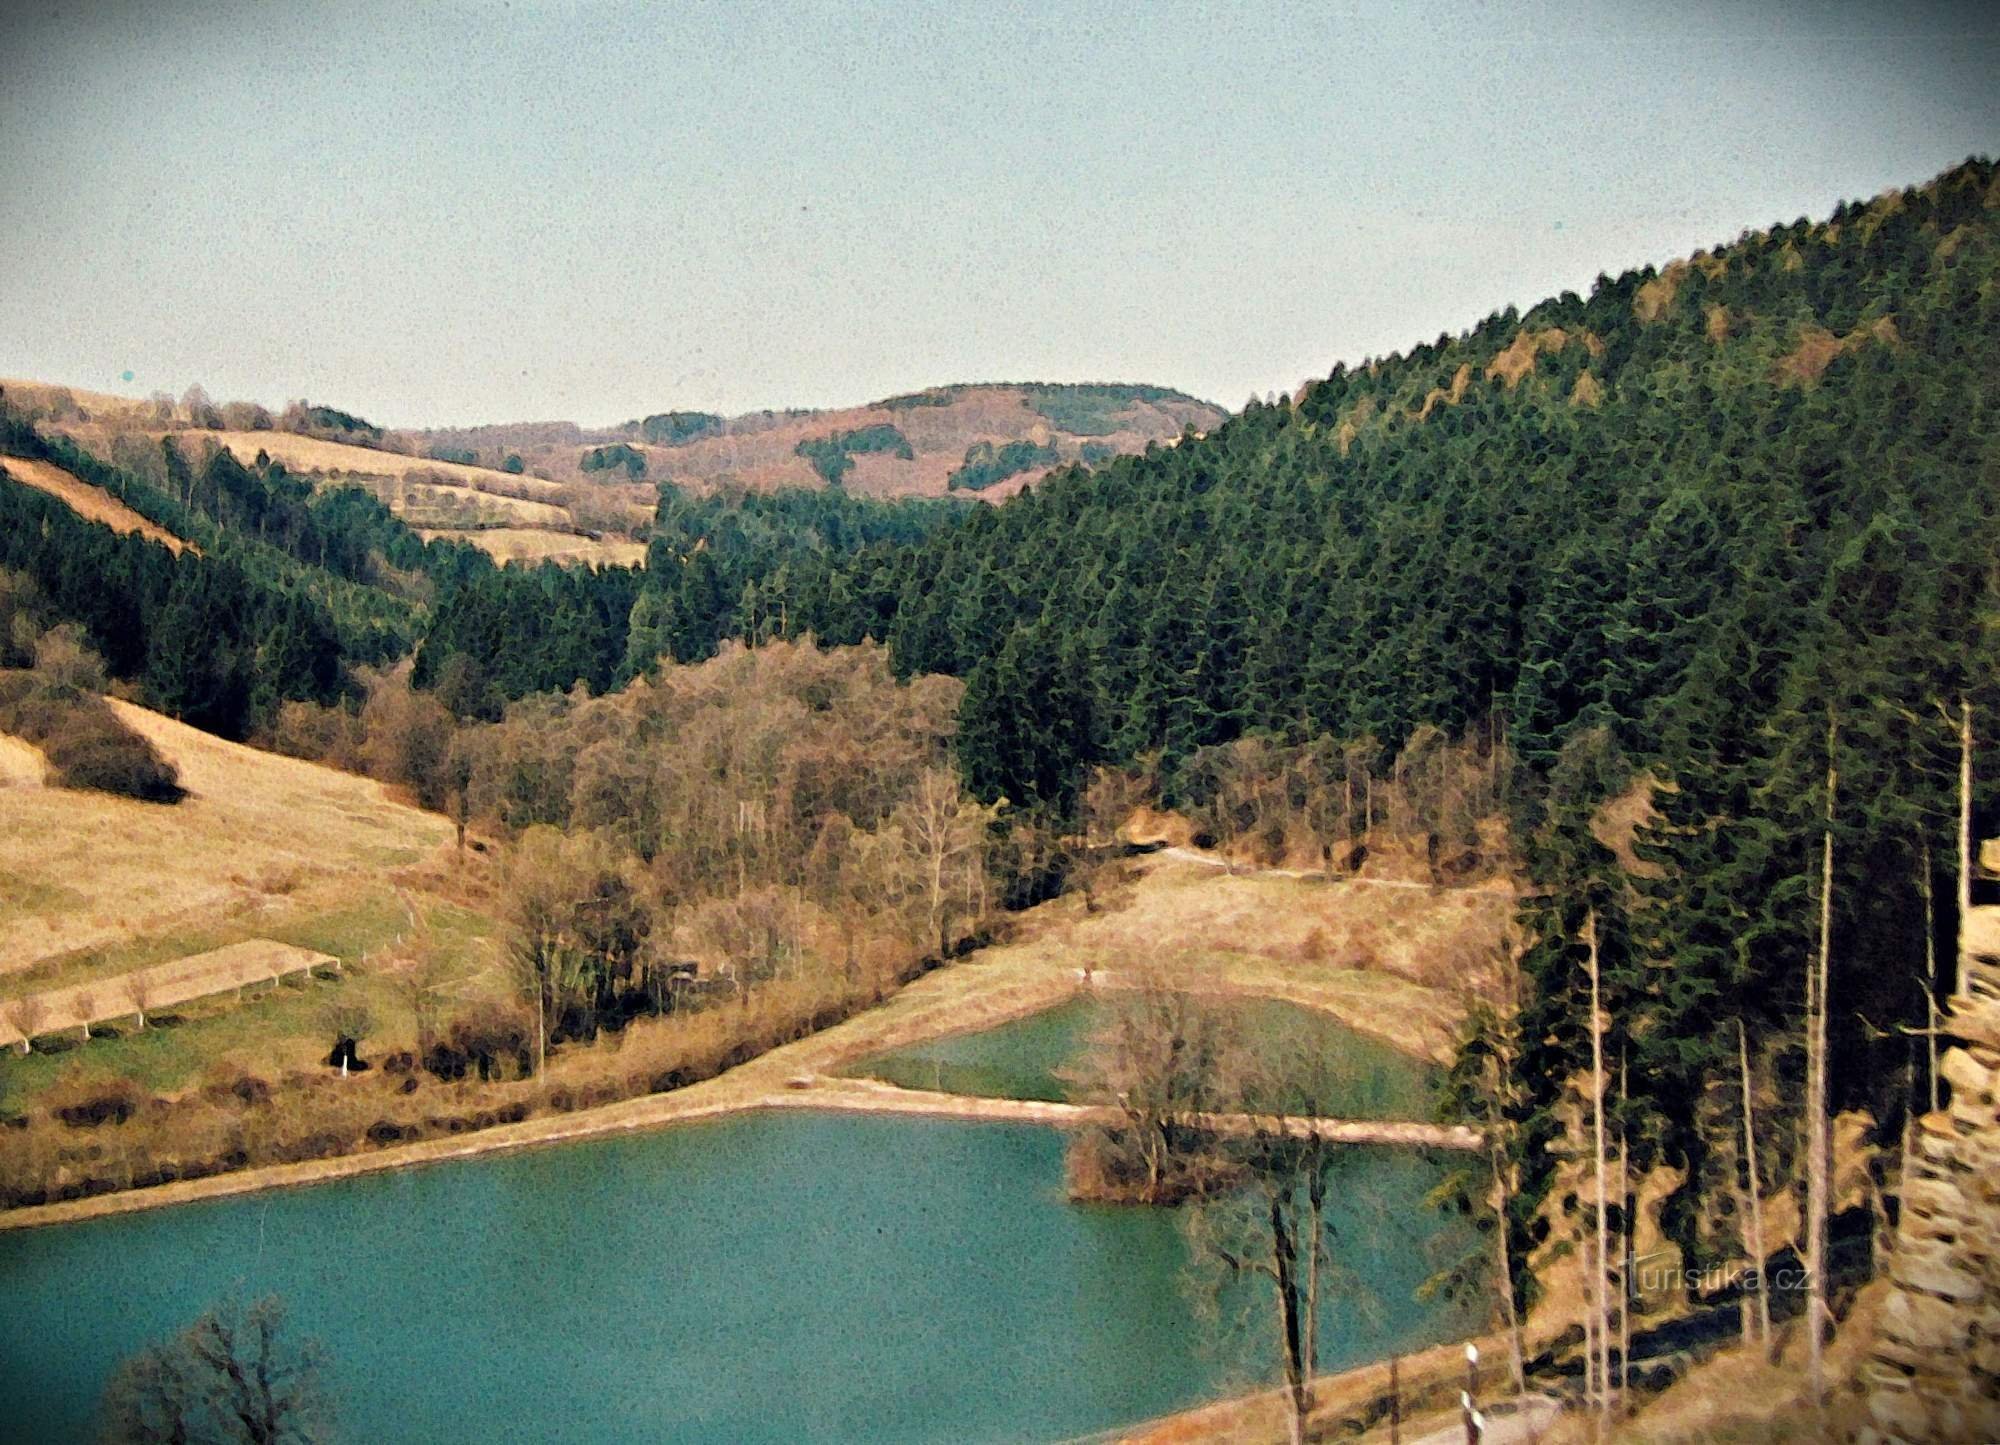 About the Brumov ponds